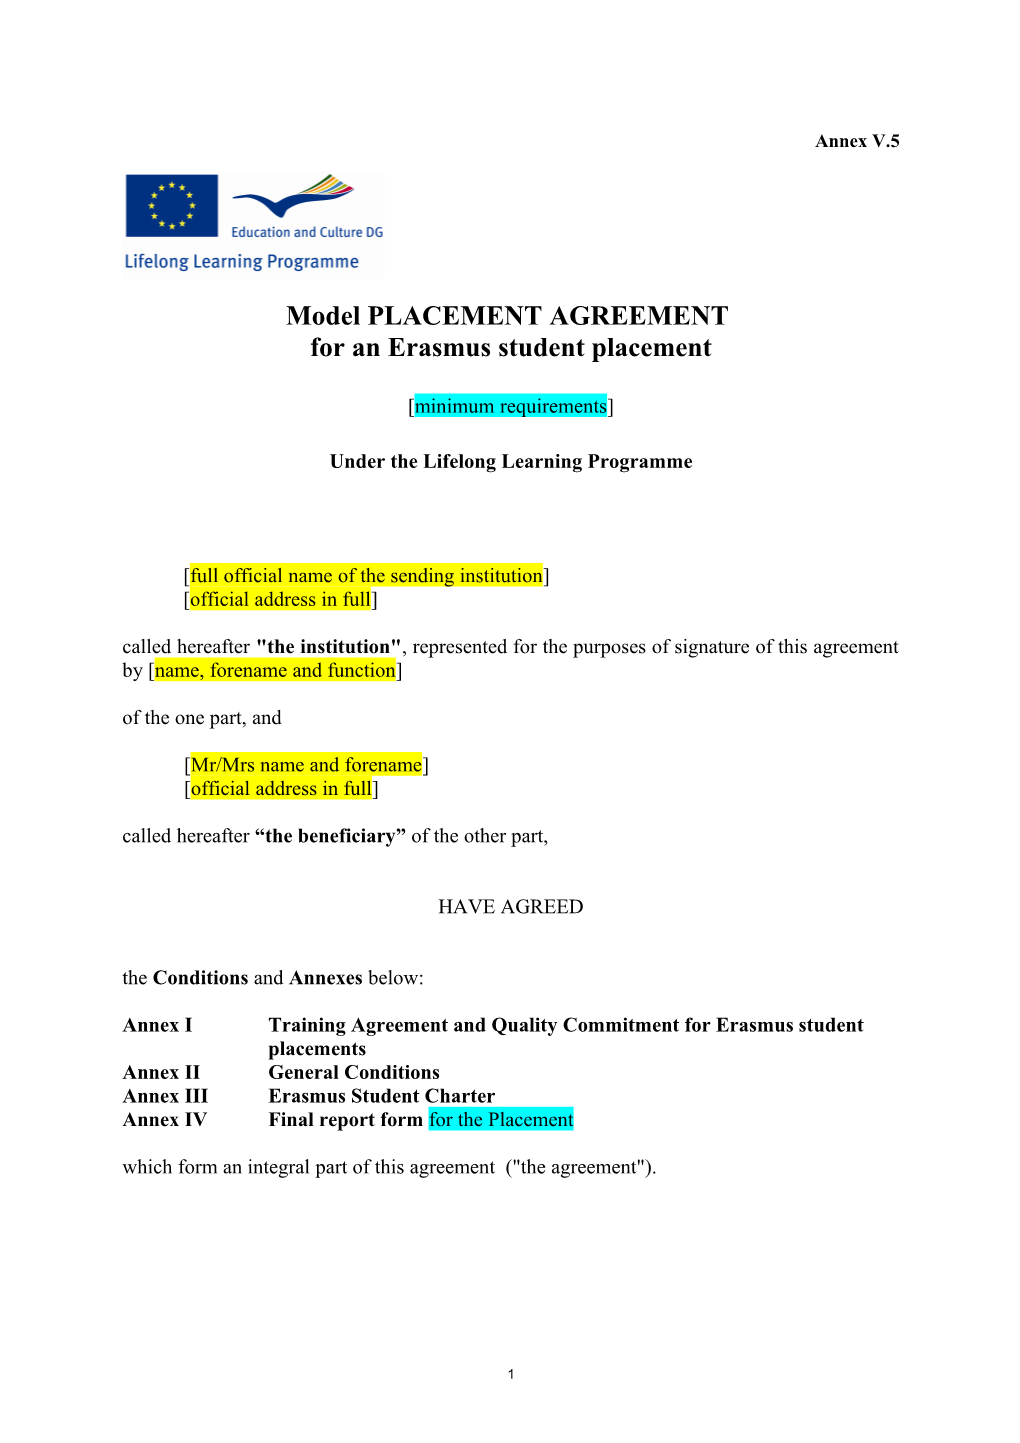 Model PLACEMENT AGREEMENT for an Erasmus Student Placement